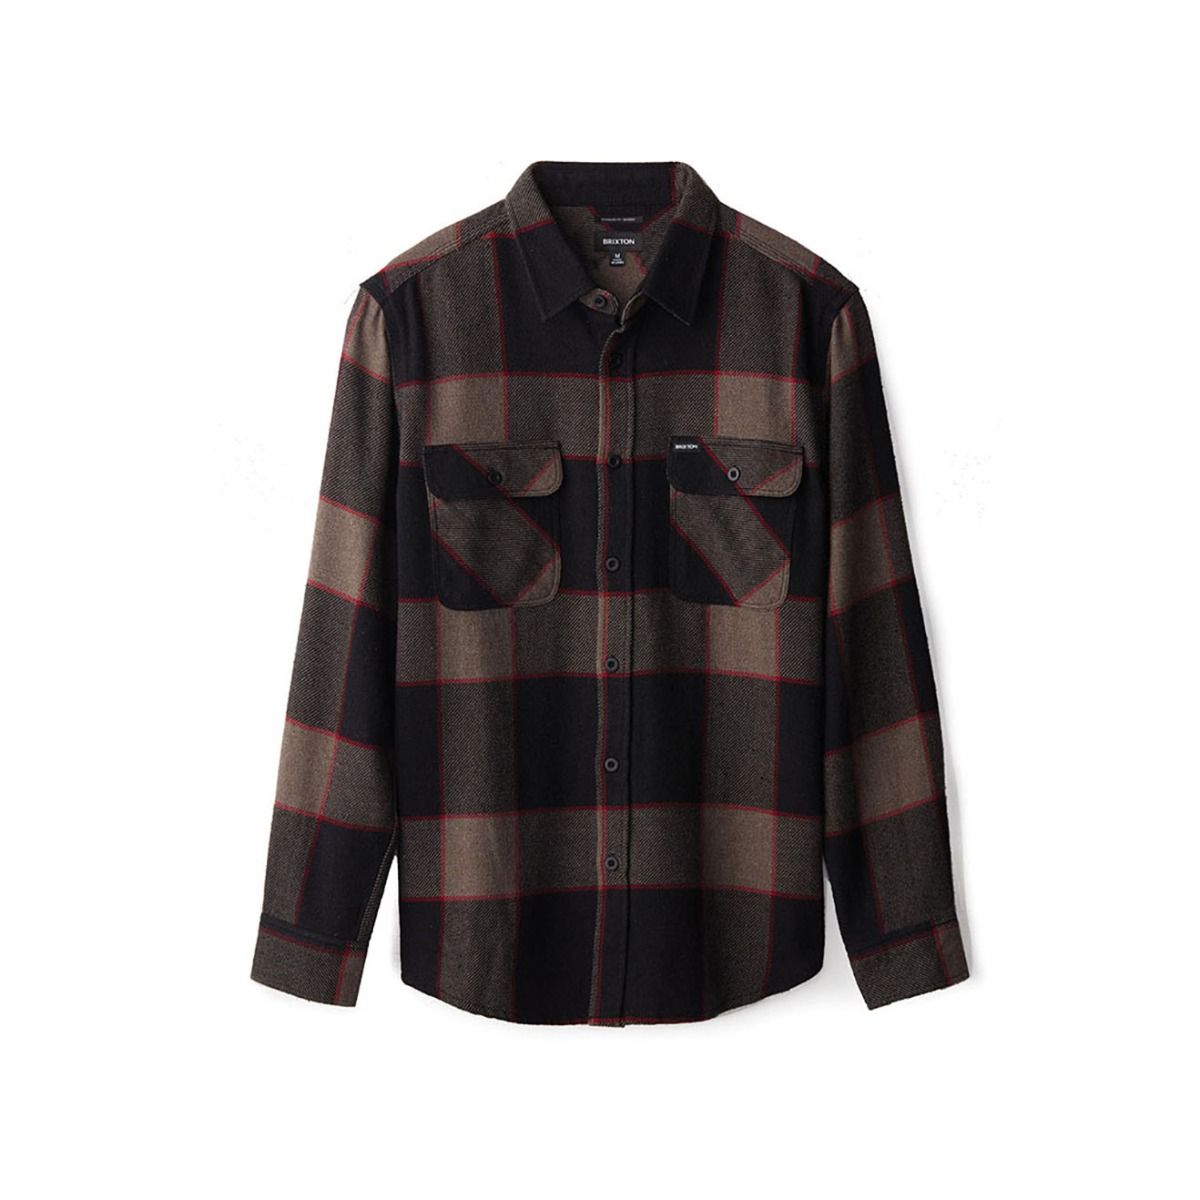 Bowery Flannel - heather grey/charcoal